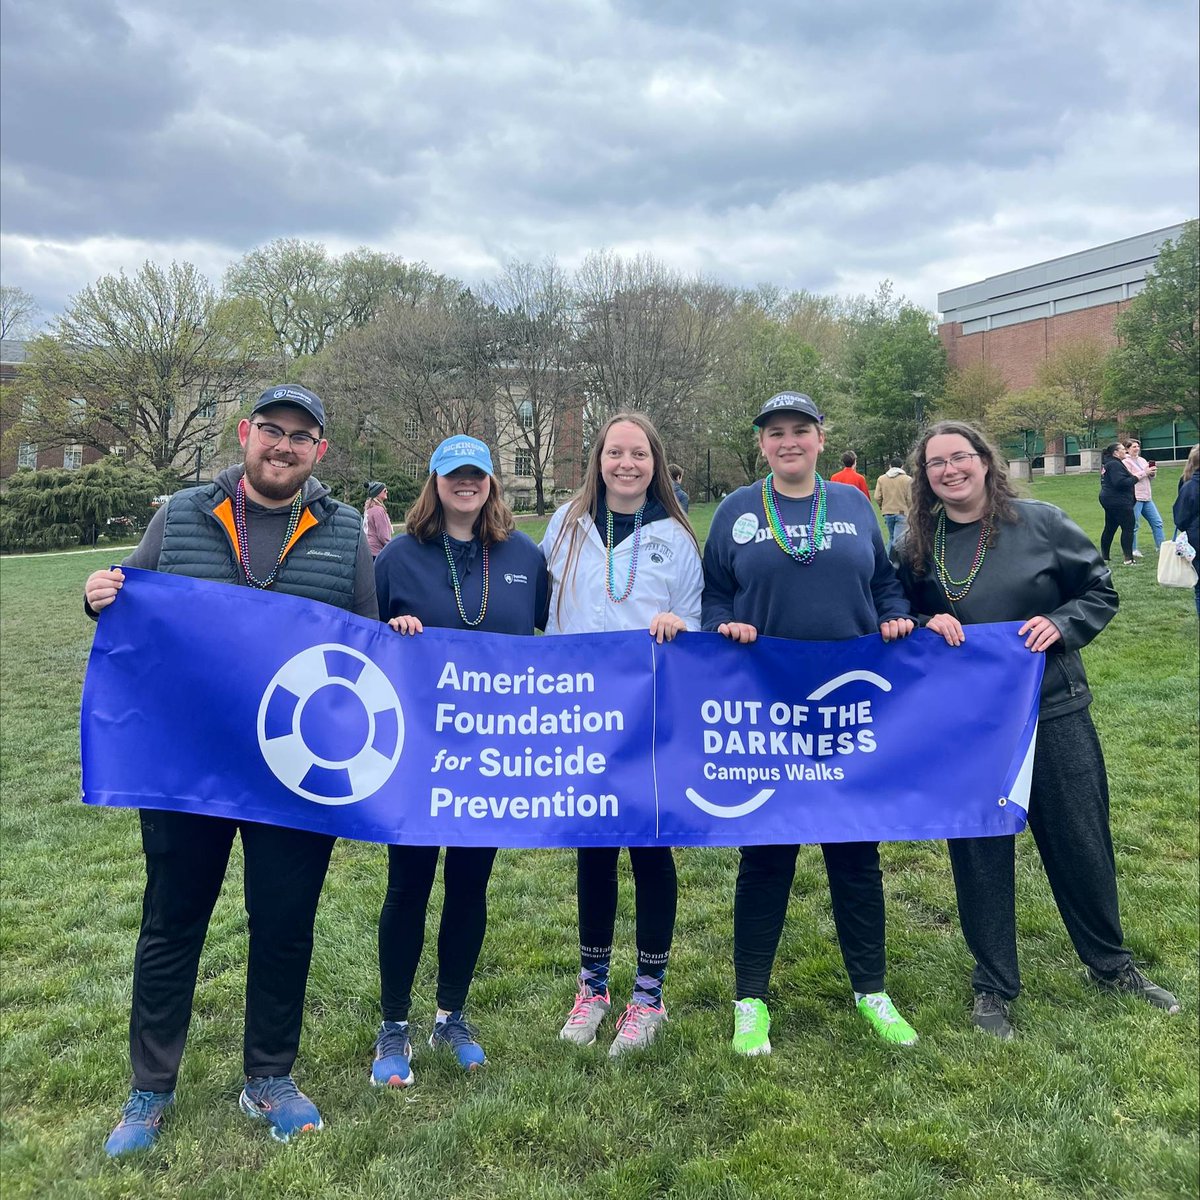 Recently, a group of Dickinson Law students attended the American Foundation for Suicide Prevention Out of the Darkness Walk in University Park. @afspnational Noah Yeagley '25, Kaci McNeave '24, Jaden Harding '24, Skyler Hancock '26, and Sara Henry '24 are pictured.